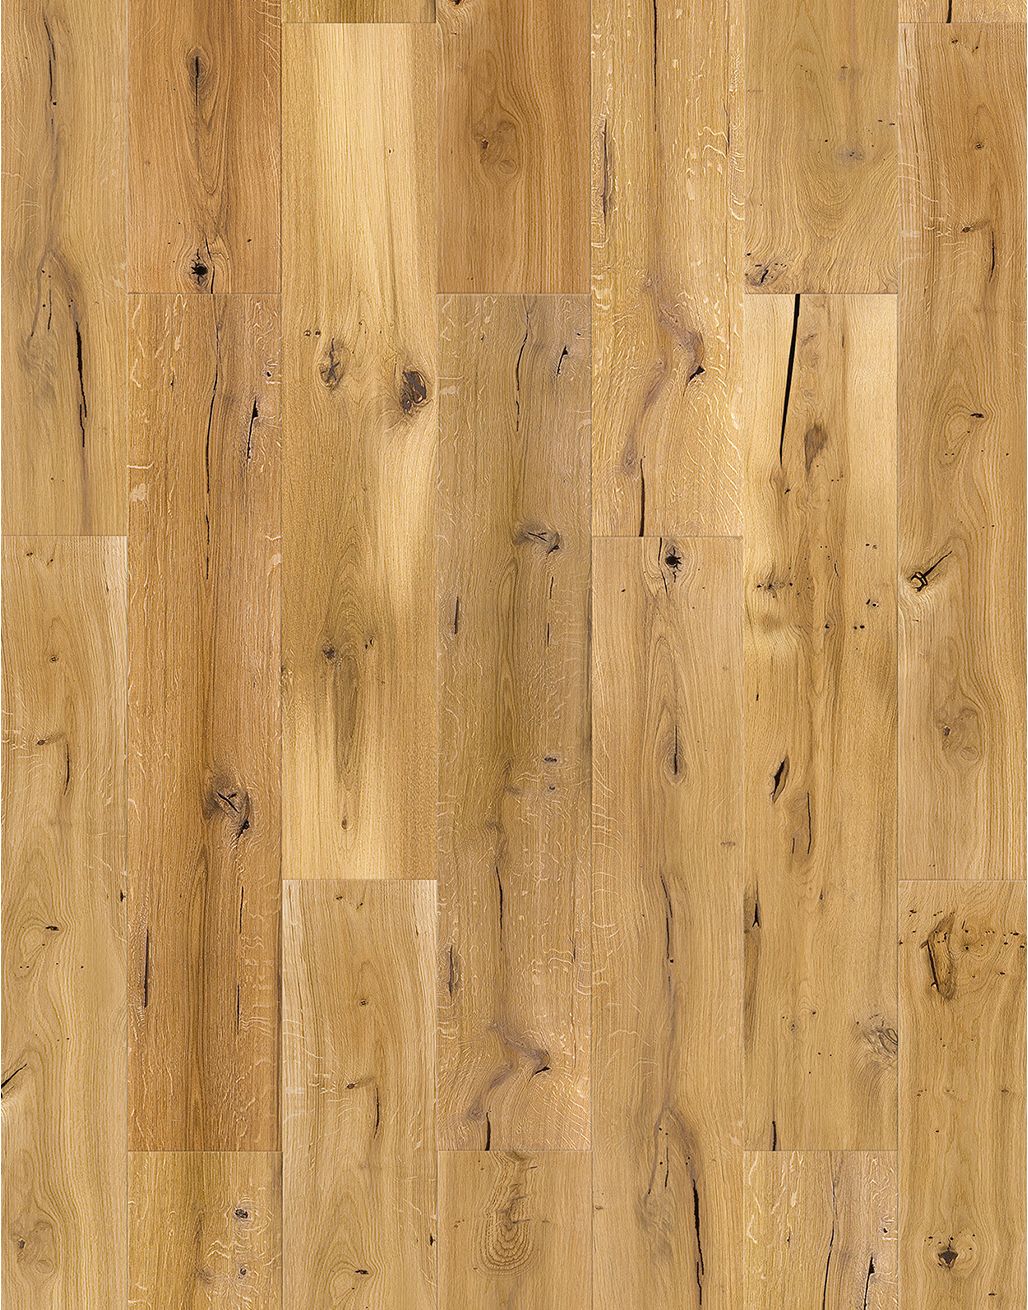 Carpenters Choice 130mm - Natural Oak Lacquered Engineered Wood Flooring 4